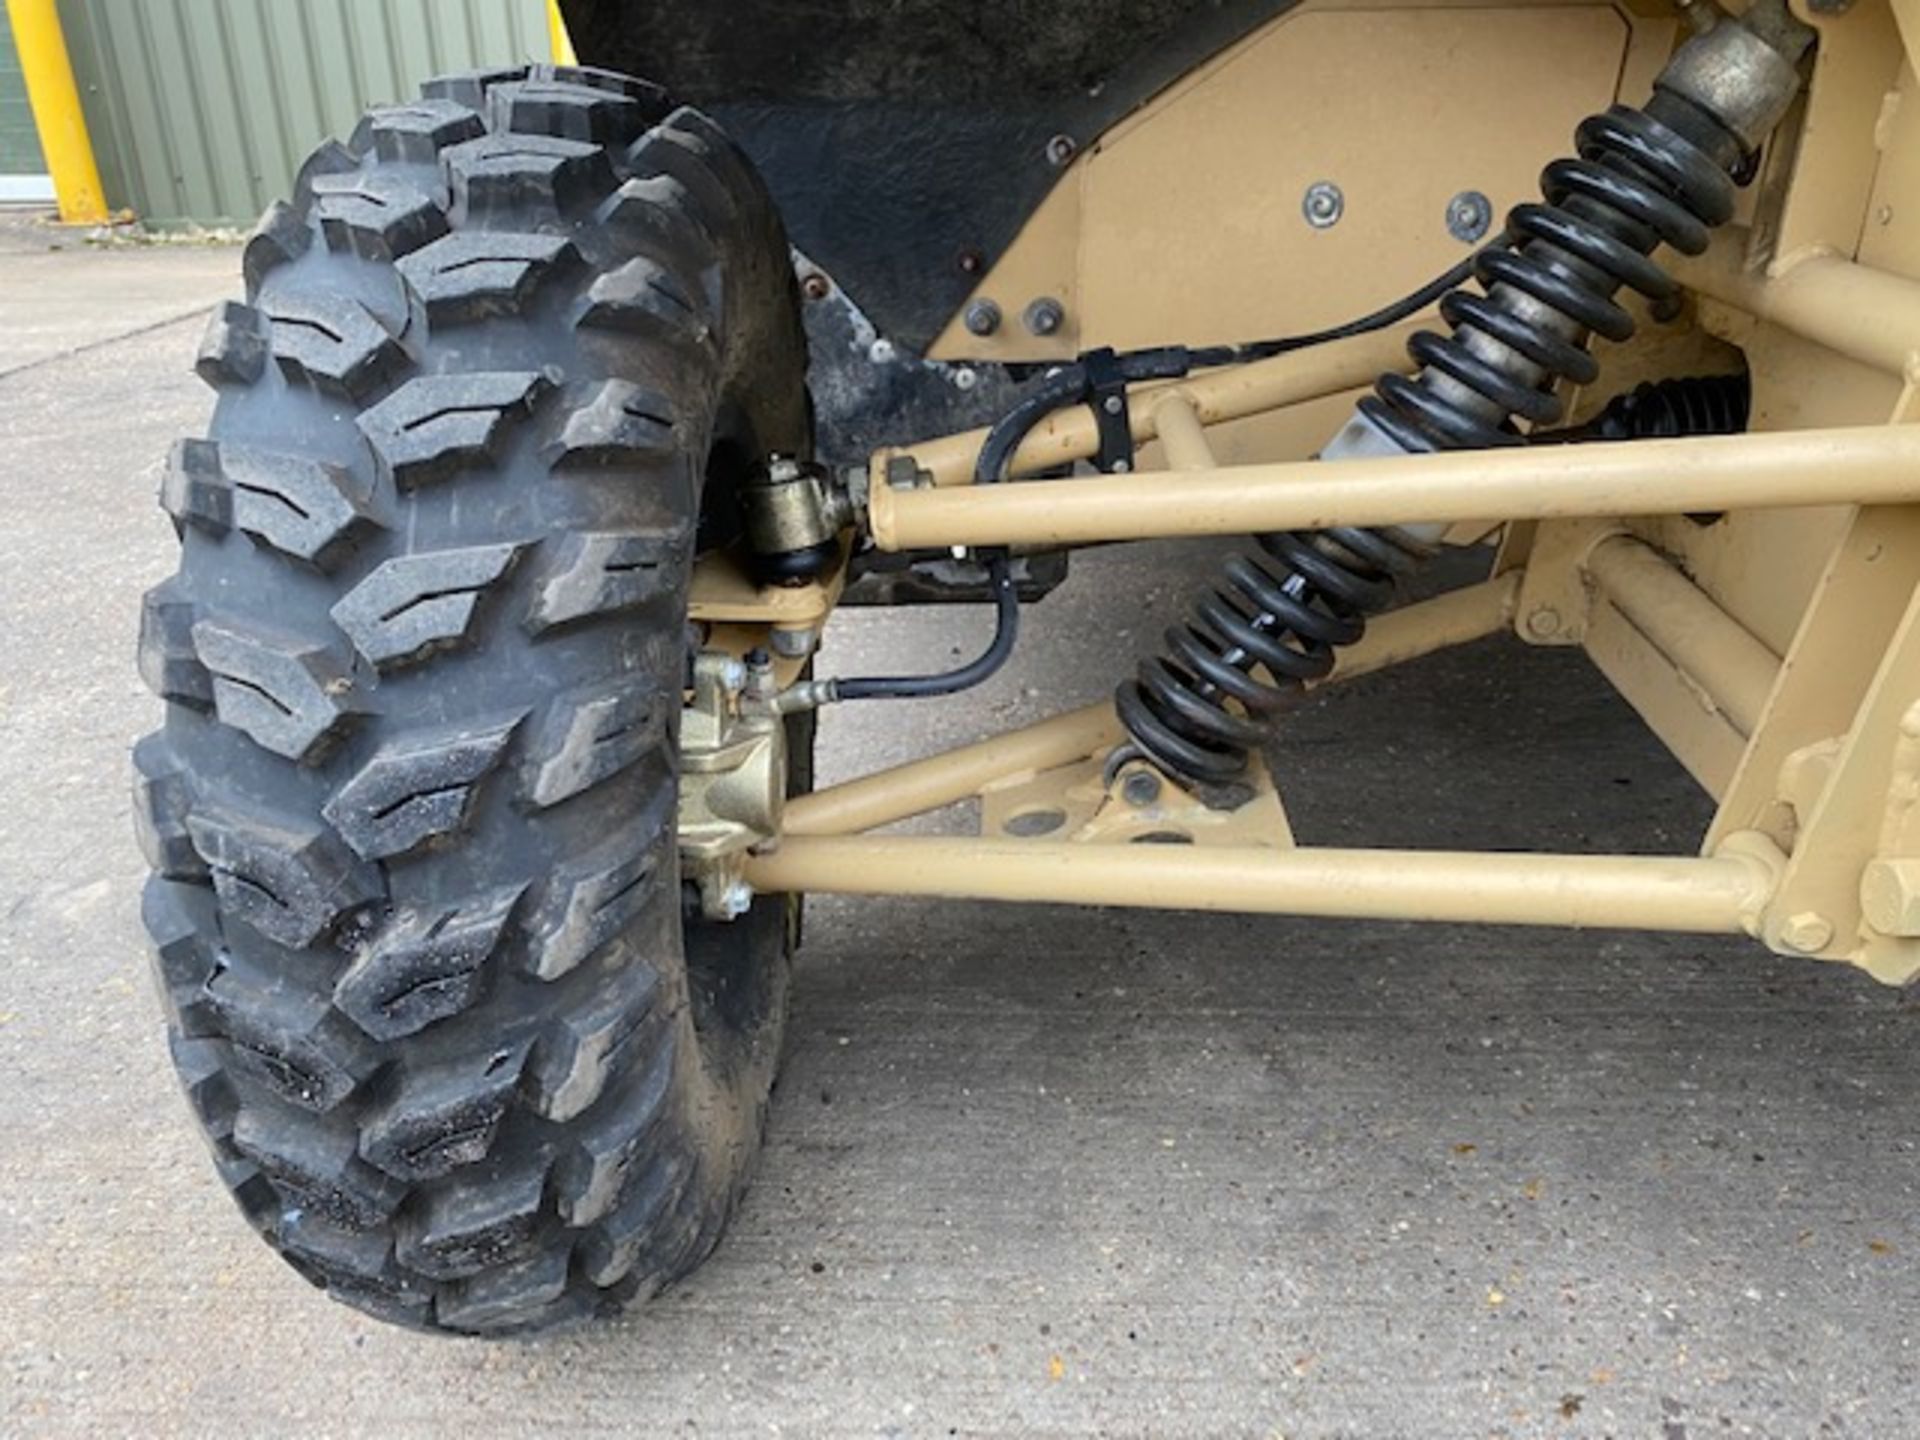 Enhanced Protection Systems (EPS) Springer ATV Only 717 Kms ex Reserve MOD - Image 13 of 42